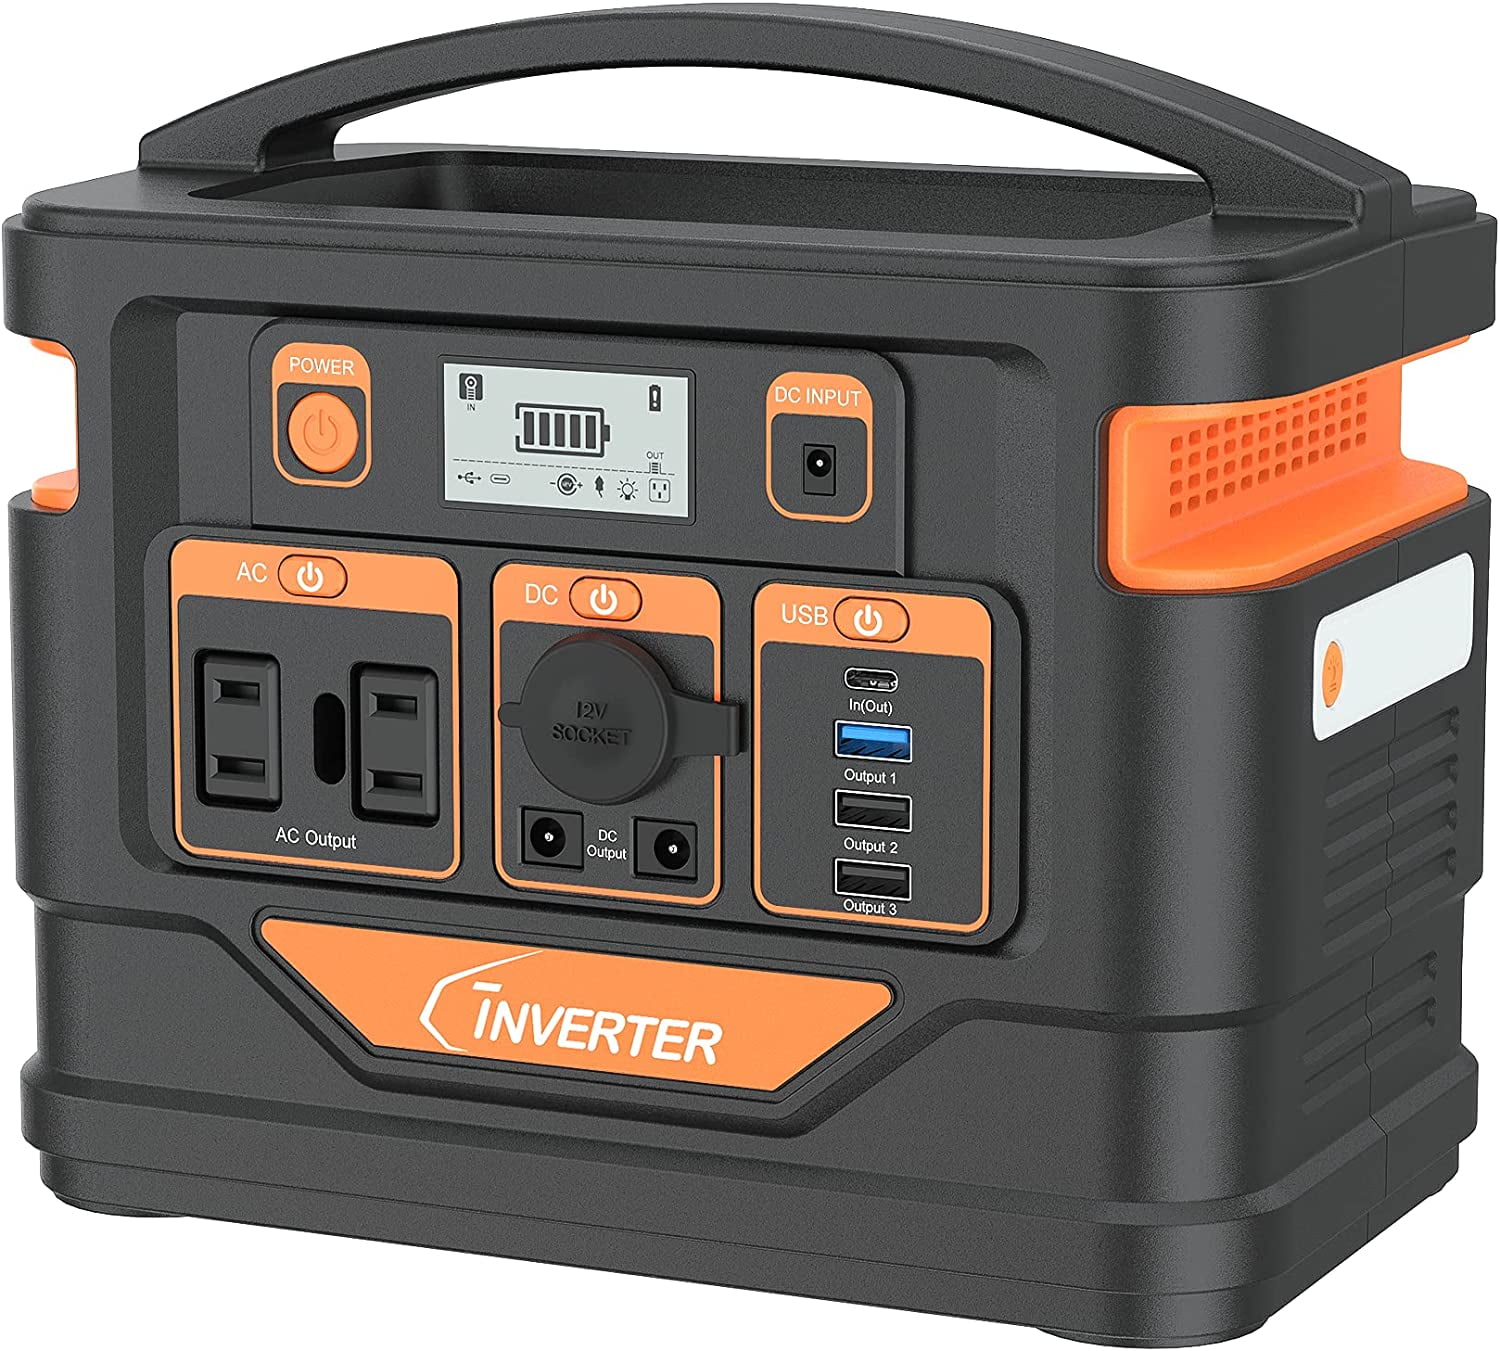 Portable Rechargeable 300w Power Supply Station Solar inverter Generator, Shop Today. Get it Tomorrow!